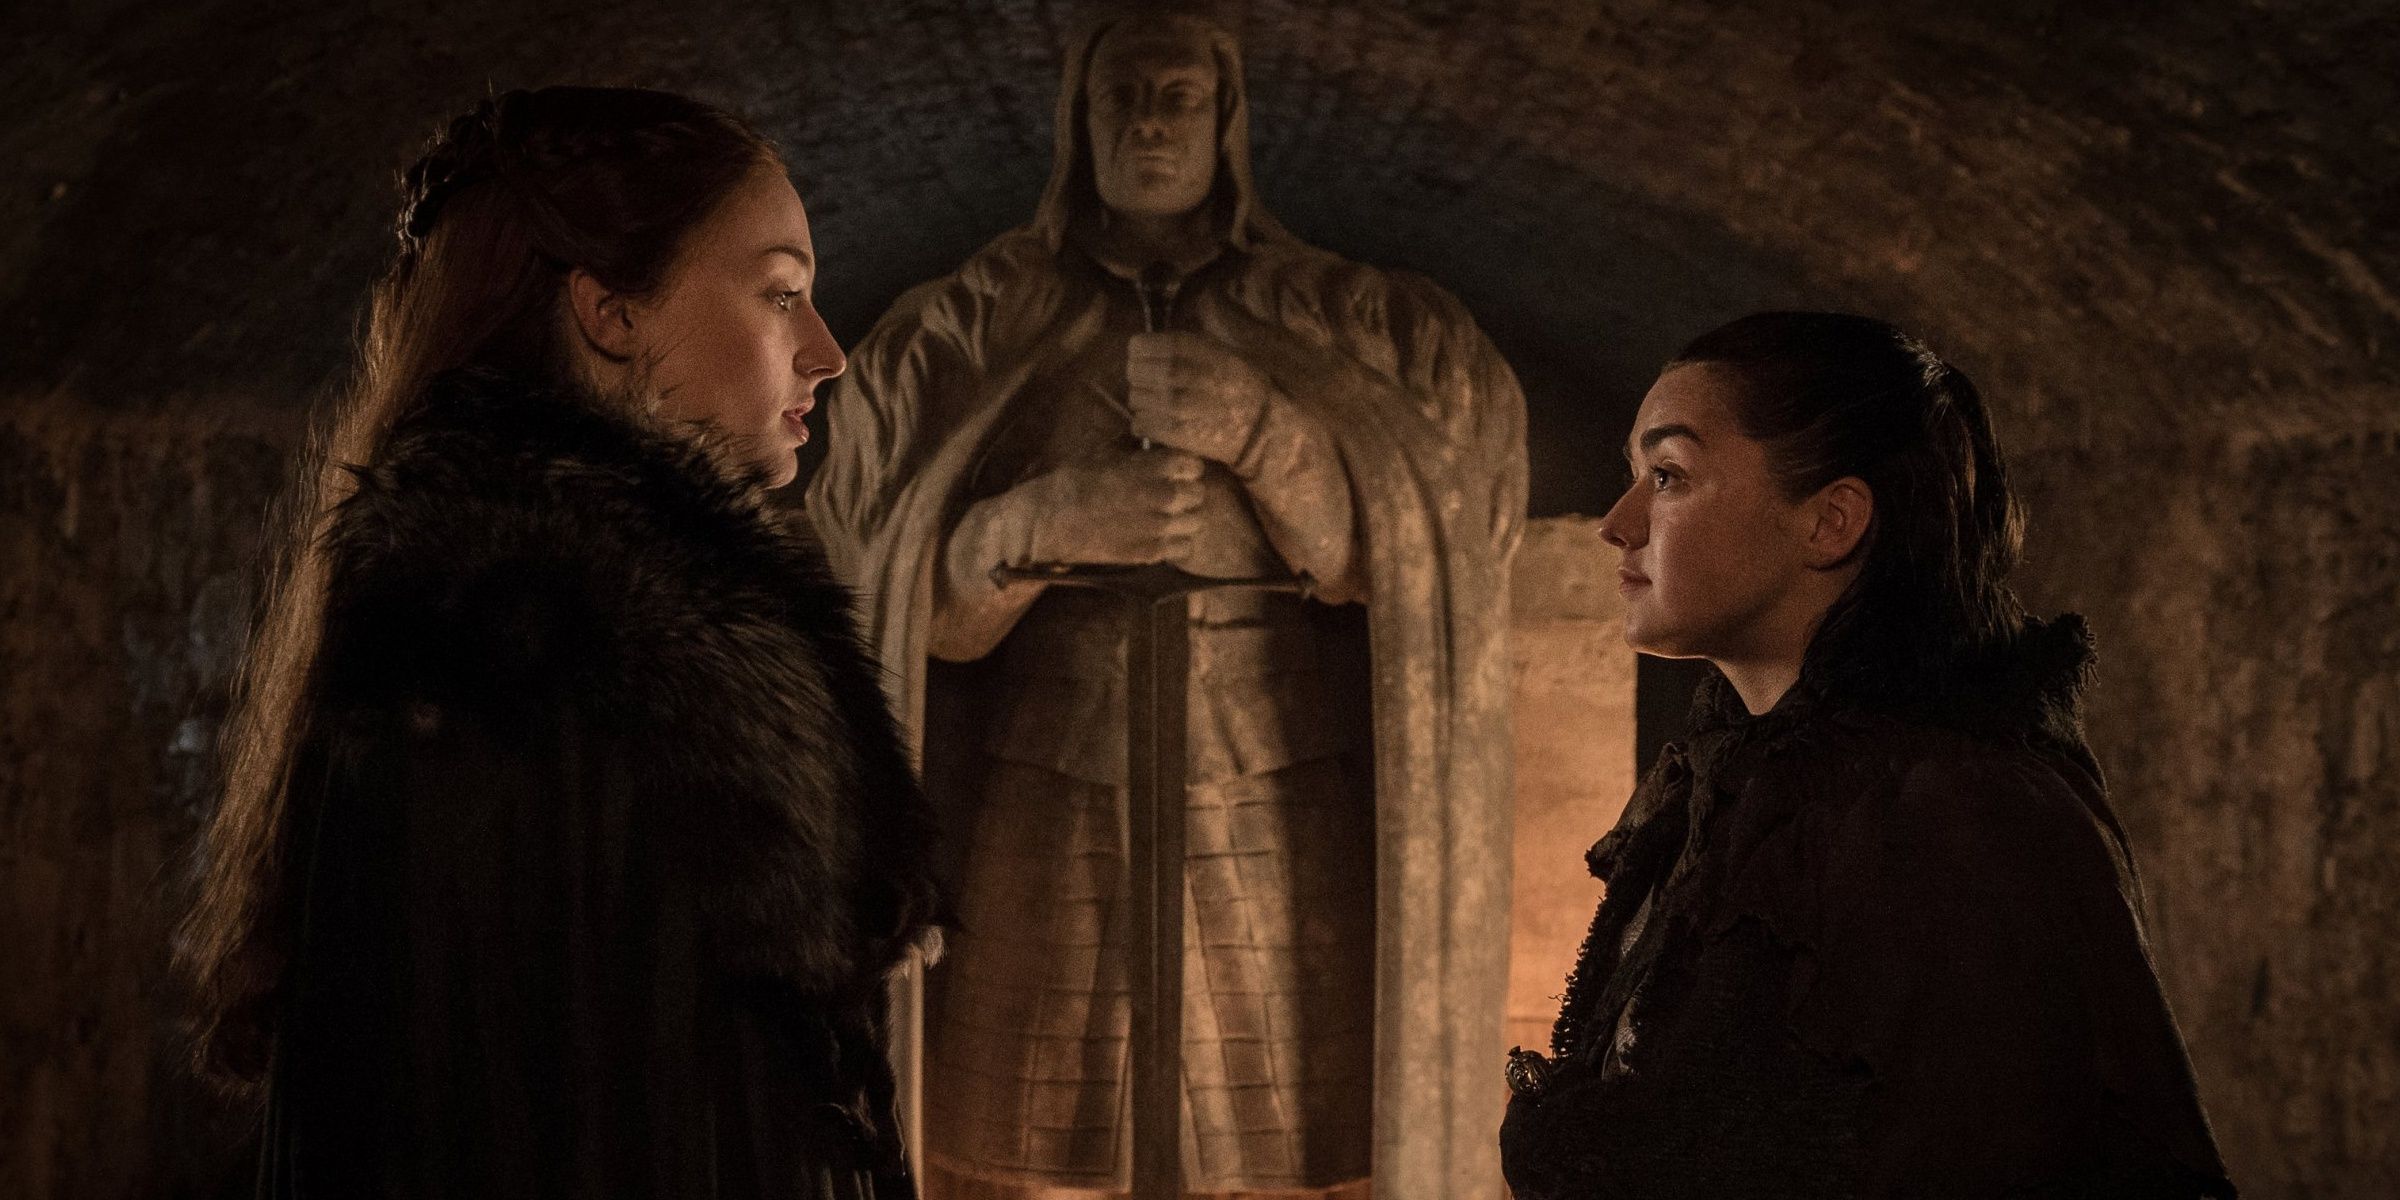 Sansa and Arya talk in front of their father's statue in Winterfell in Game of Thrones 